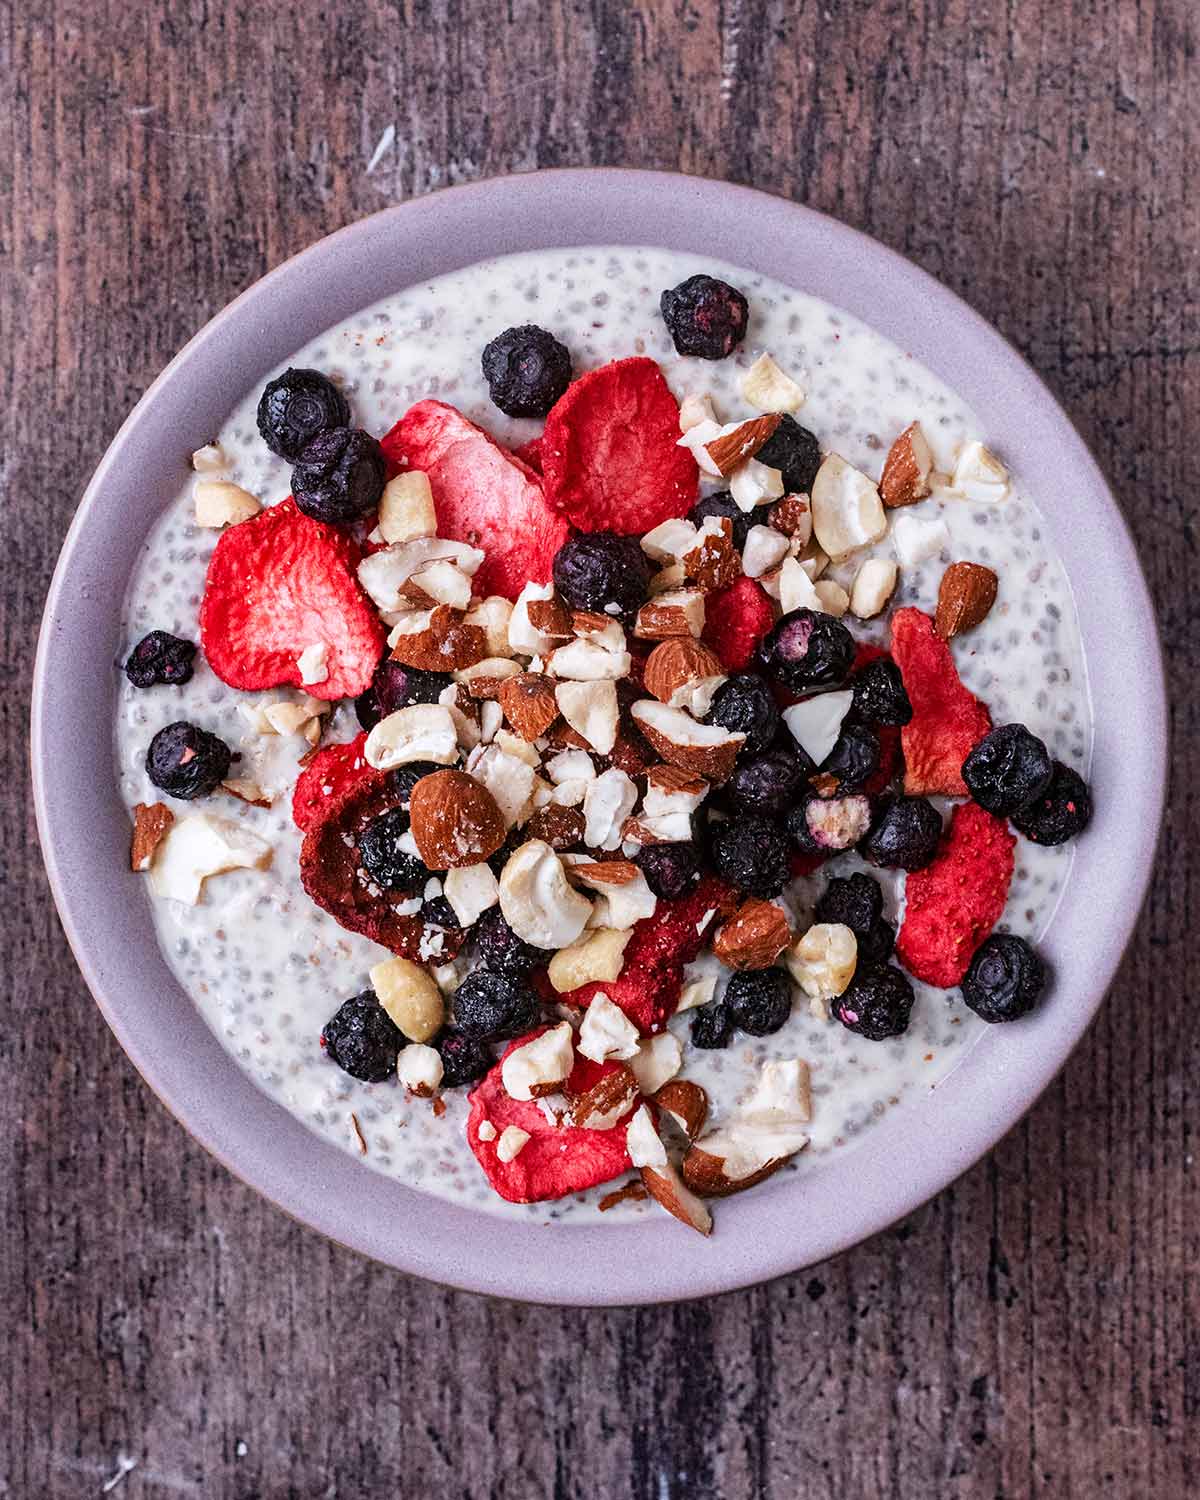 Chia pudding in a bowl with berries and crushed nuts.